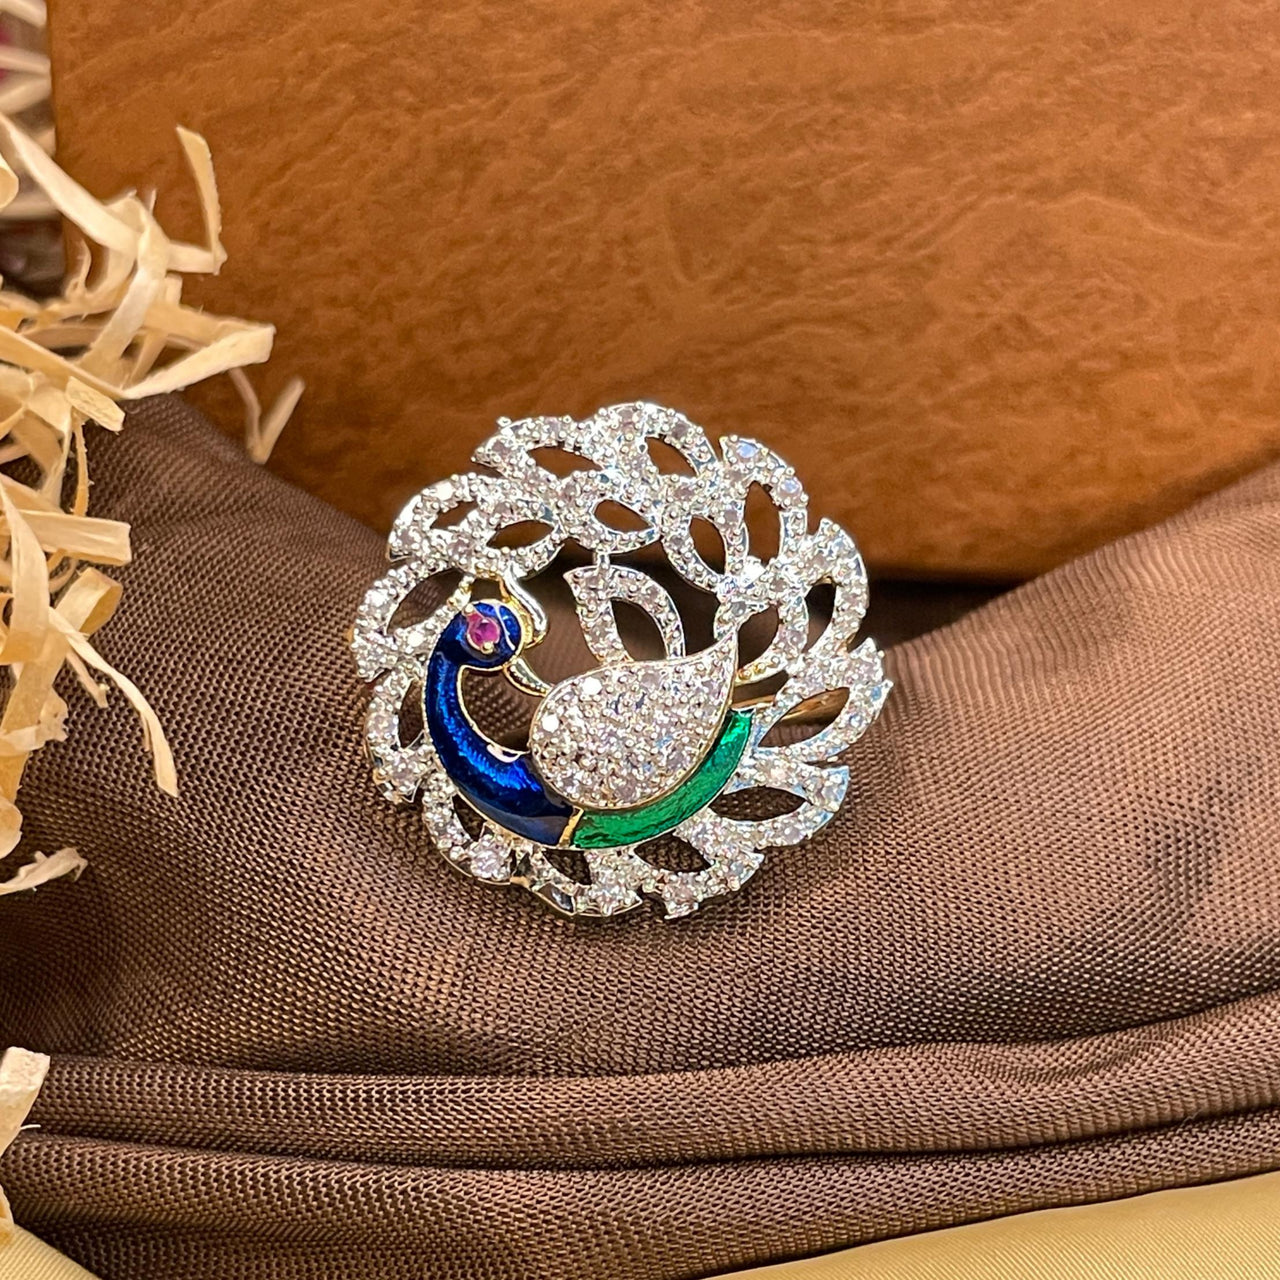 Delightful Round Peacock Ring